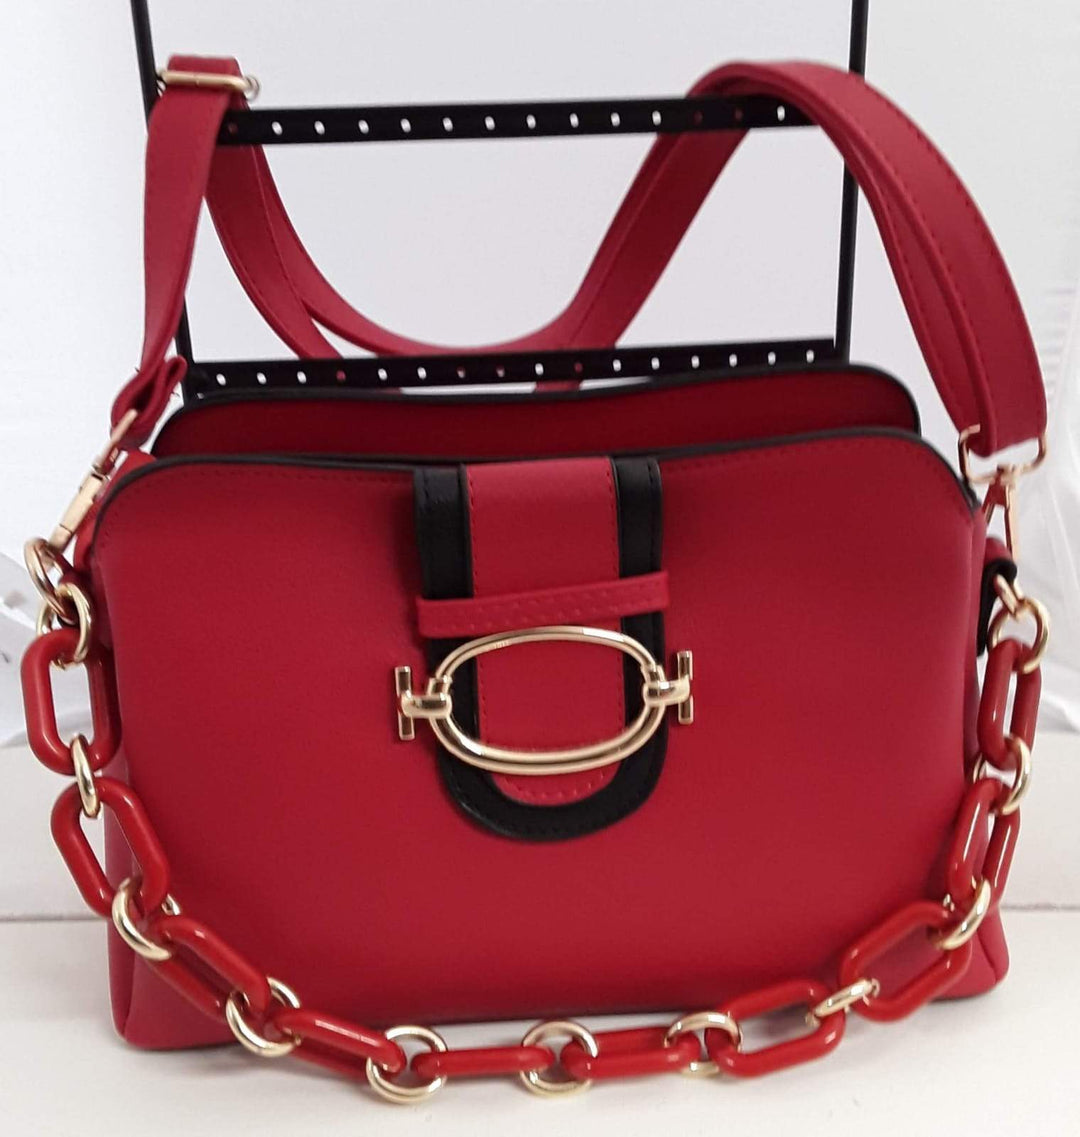 Lovely Black Hand Bag with Chainlink Strap